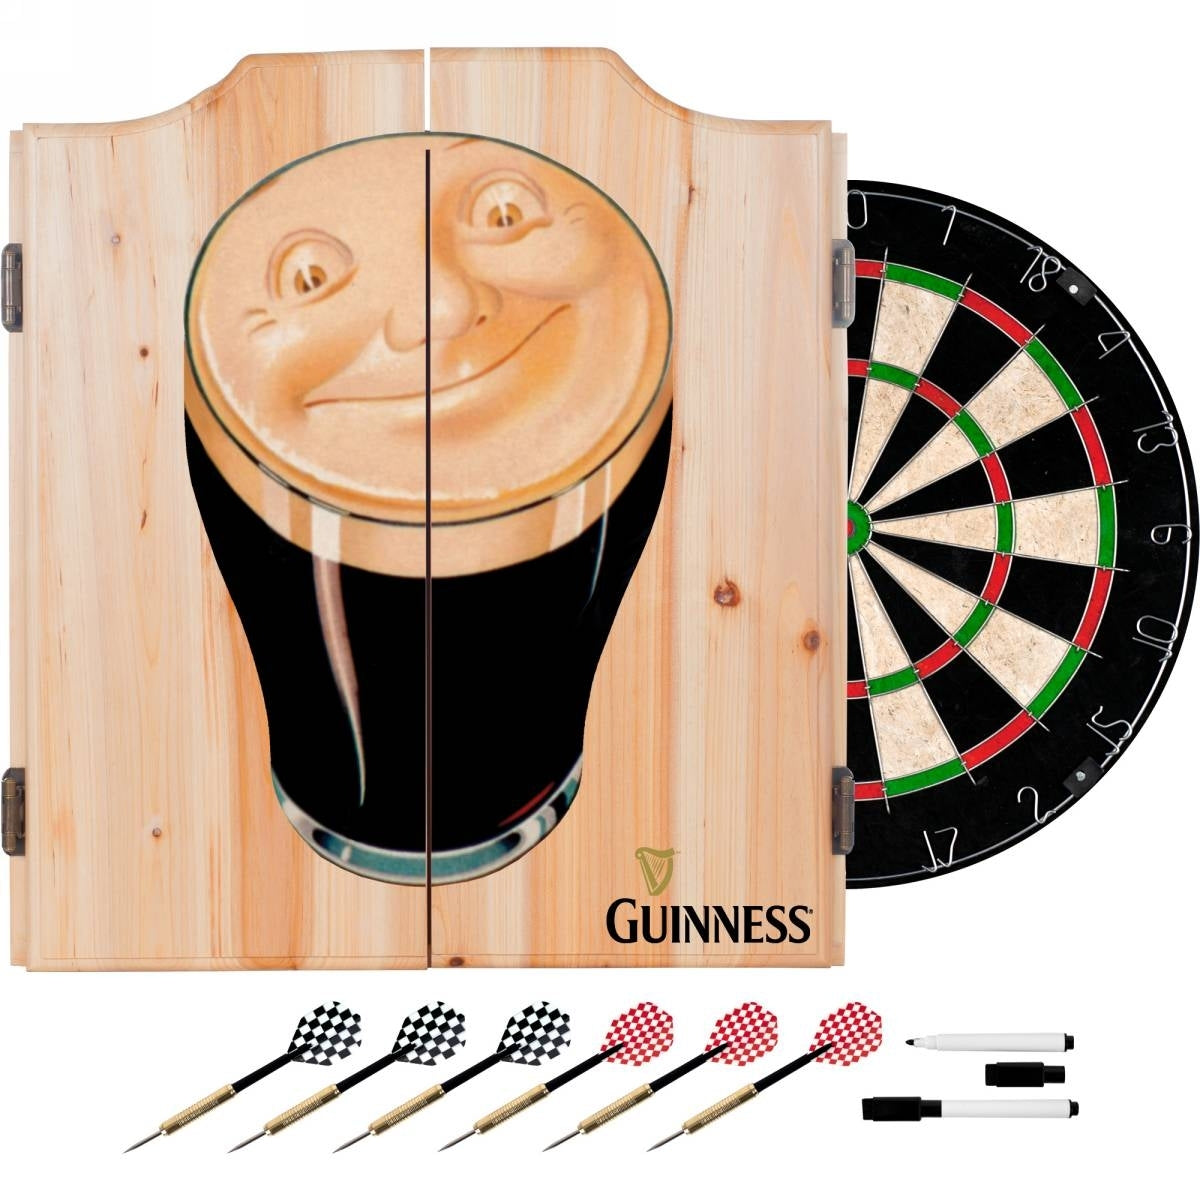 Guinness Dart Cabinet Set with Darts and Board - Smiling Pint